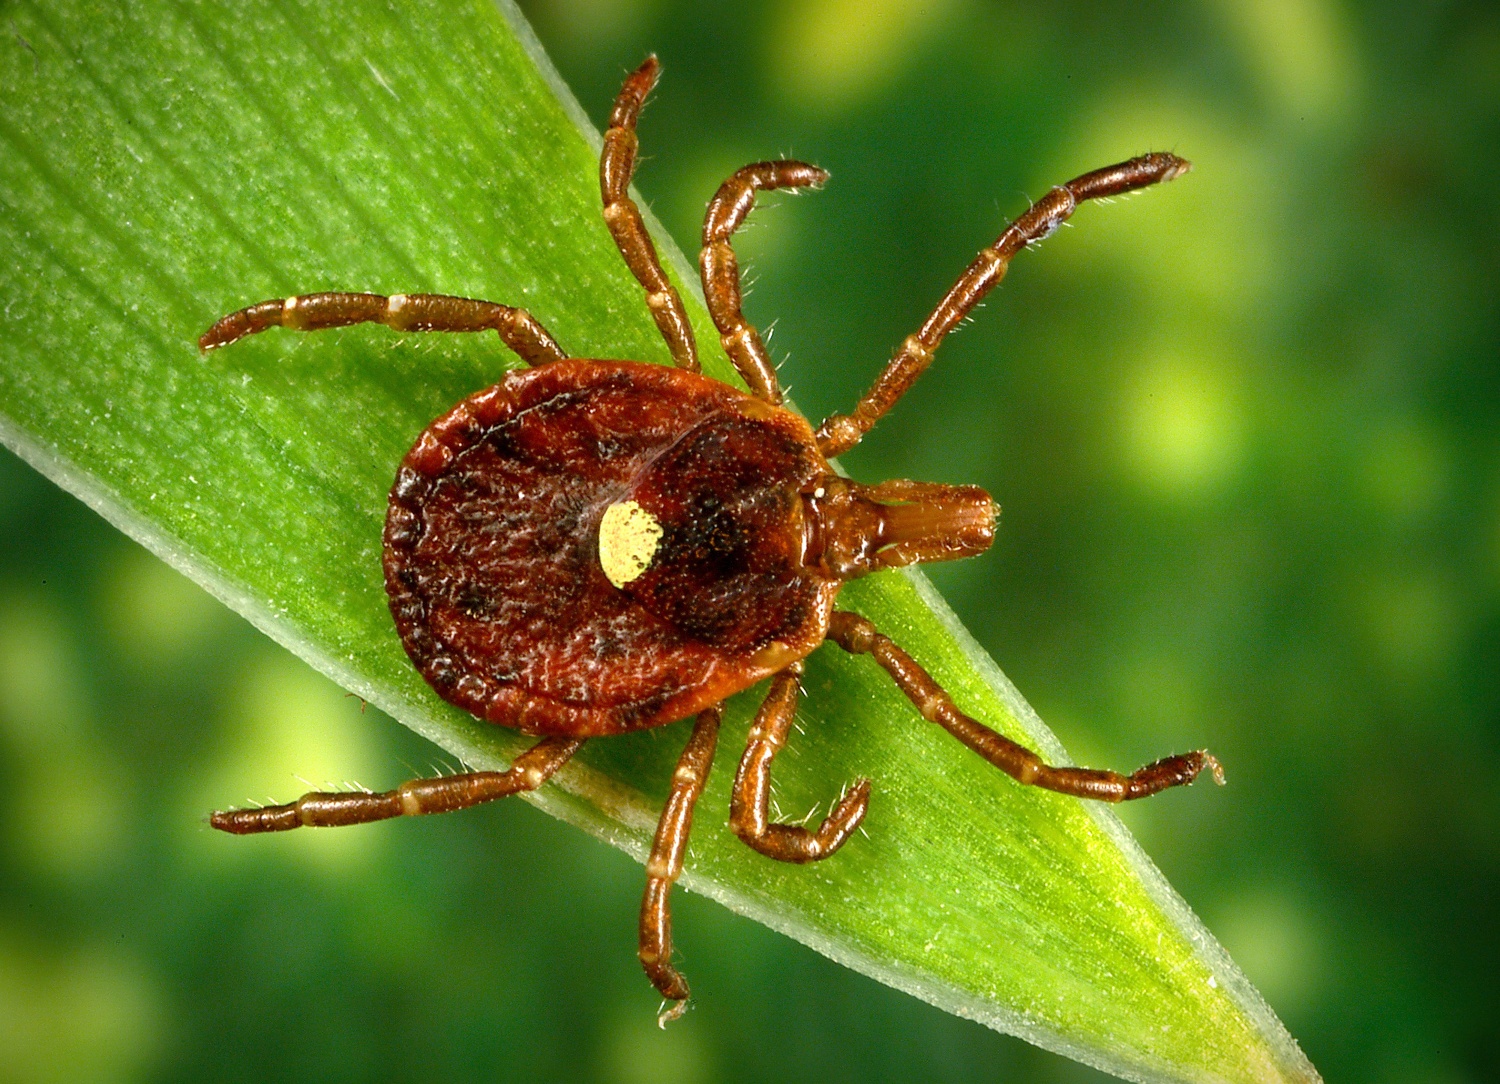 Lone star tick linked to Heartland virus in people now found in 6 states